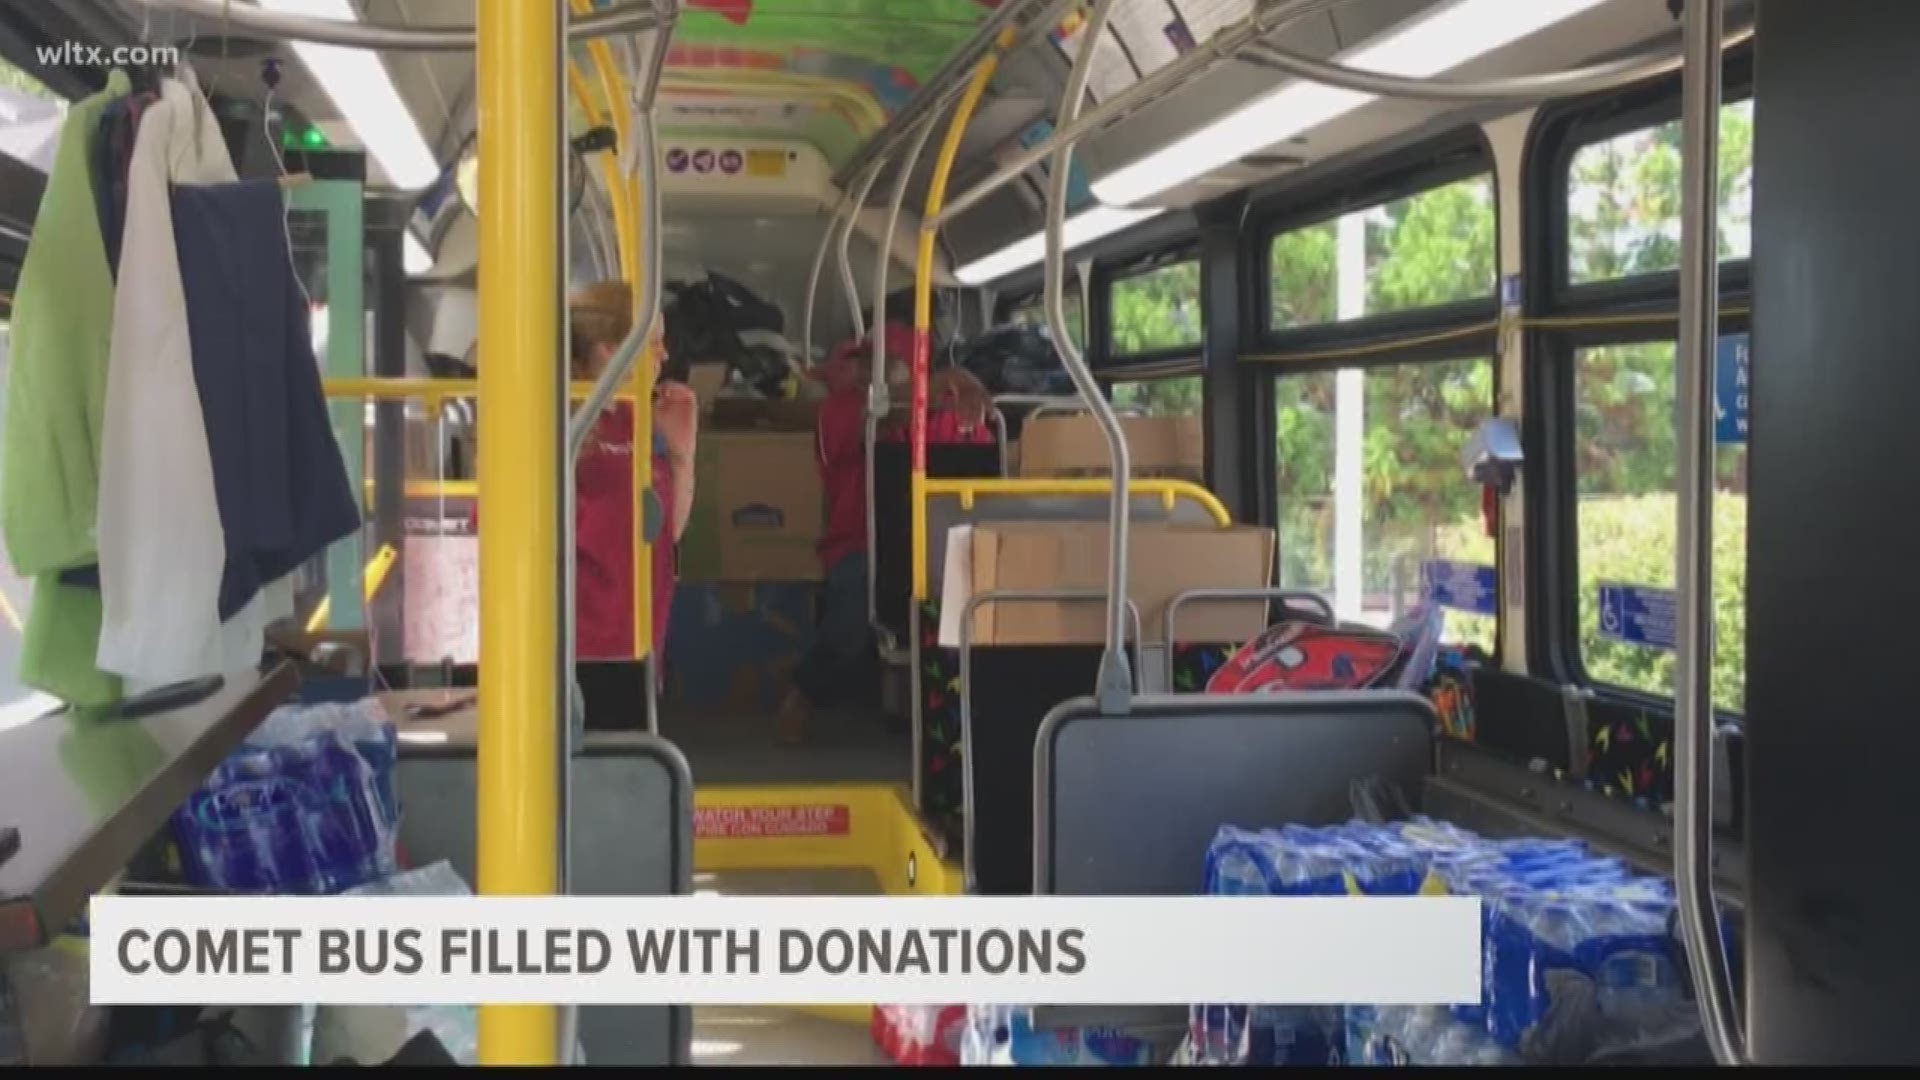 A City of Columbia bus was filled with donations for those affected by Hurricane Florence.